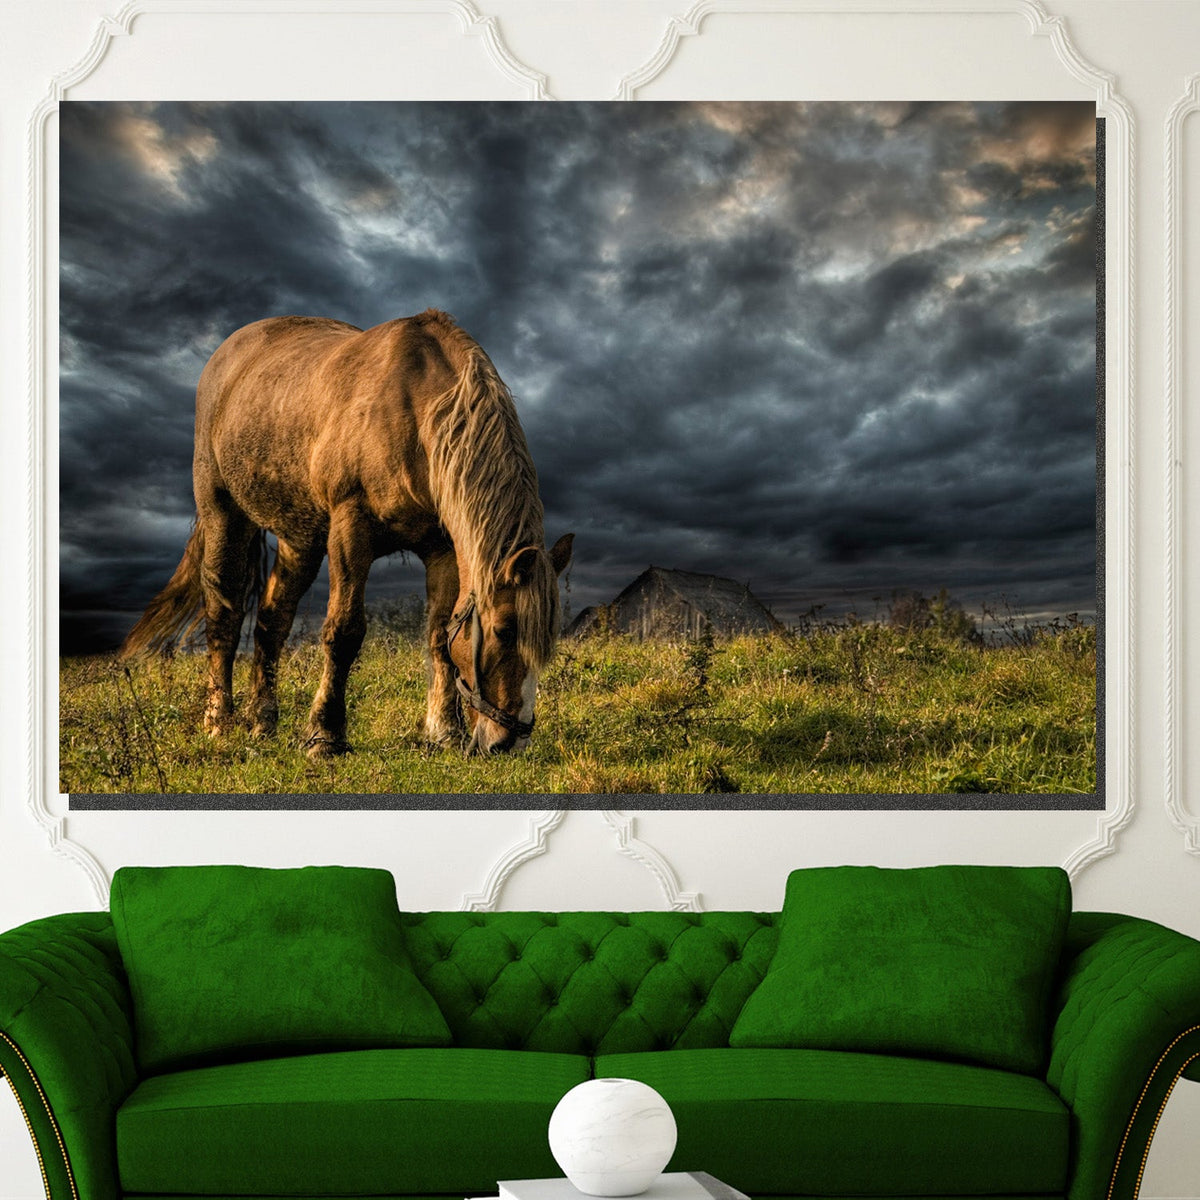 https://cdn.shopify.com/s/files/1/0387/9986/8044/products/ClydesdaleHorseCanvasArtprintStretched-4.jpg